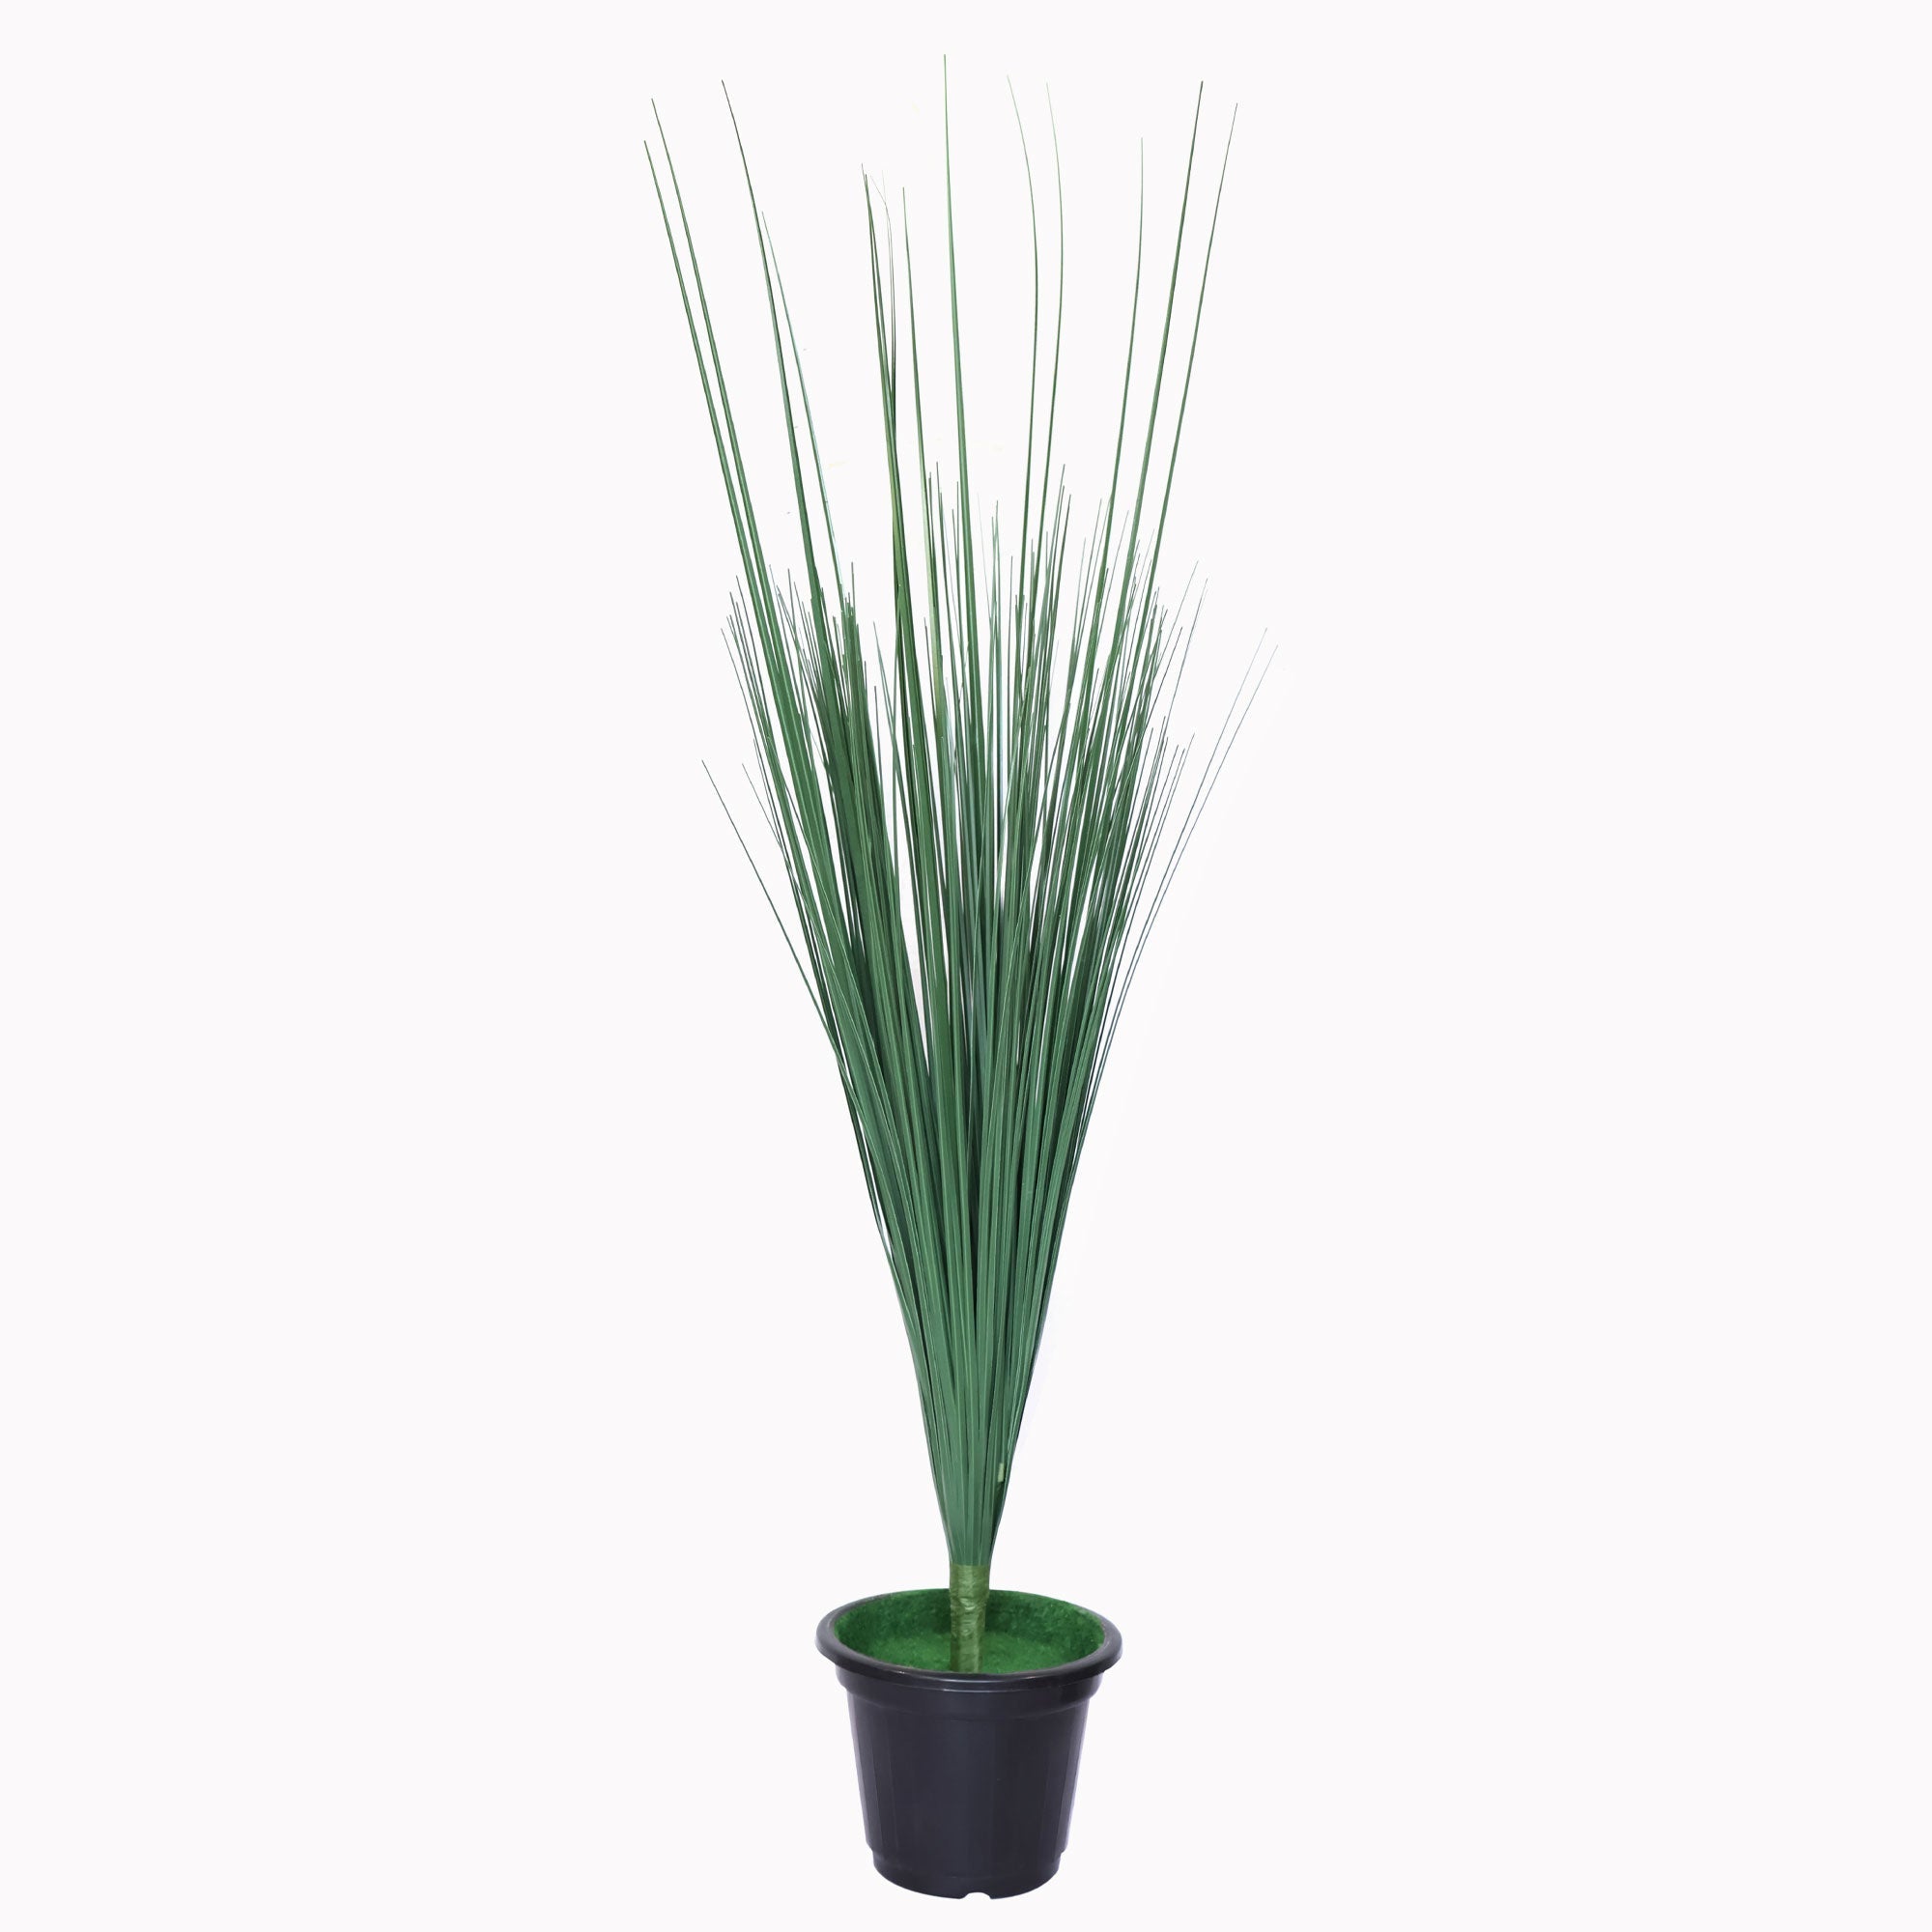 AAVANA GREENS 36" Artificial Plants Greenery Wheat Grass, UV Resistant Realistic Faux Fake Shrubs Plant Onion Grass for Home, Office, Living Room, Garden, Dark Green